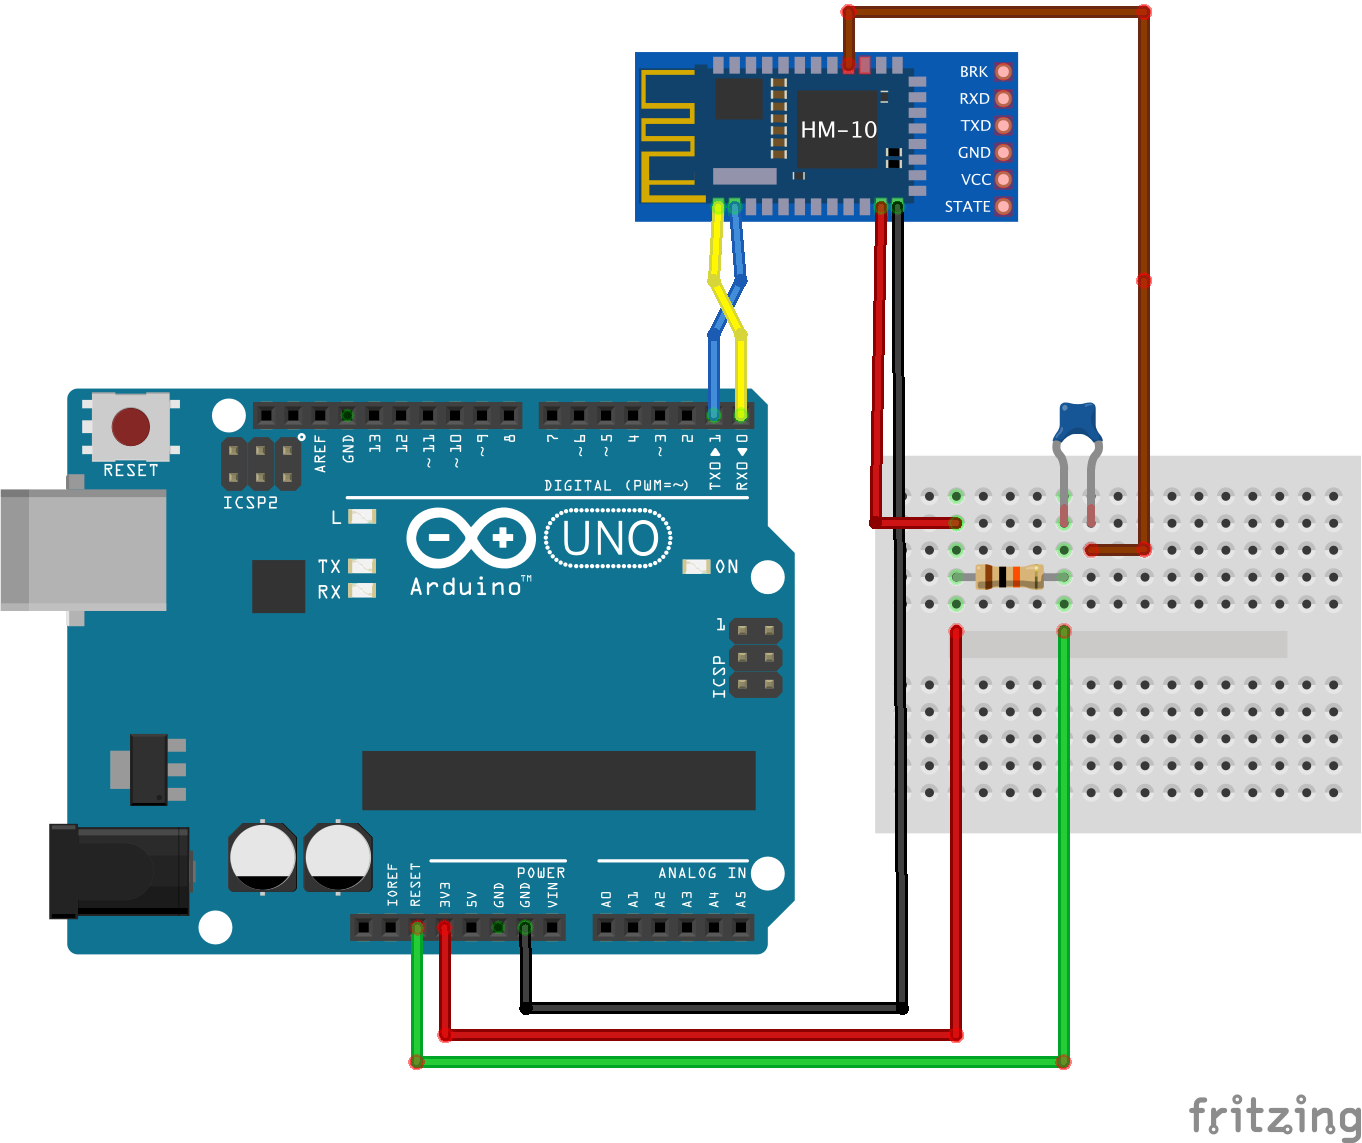 Apploader - upload Arduino sketches over BLE from iPad/iPhone: HM